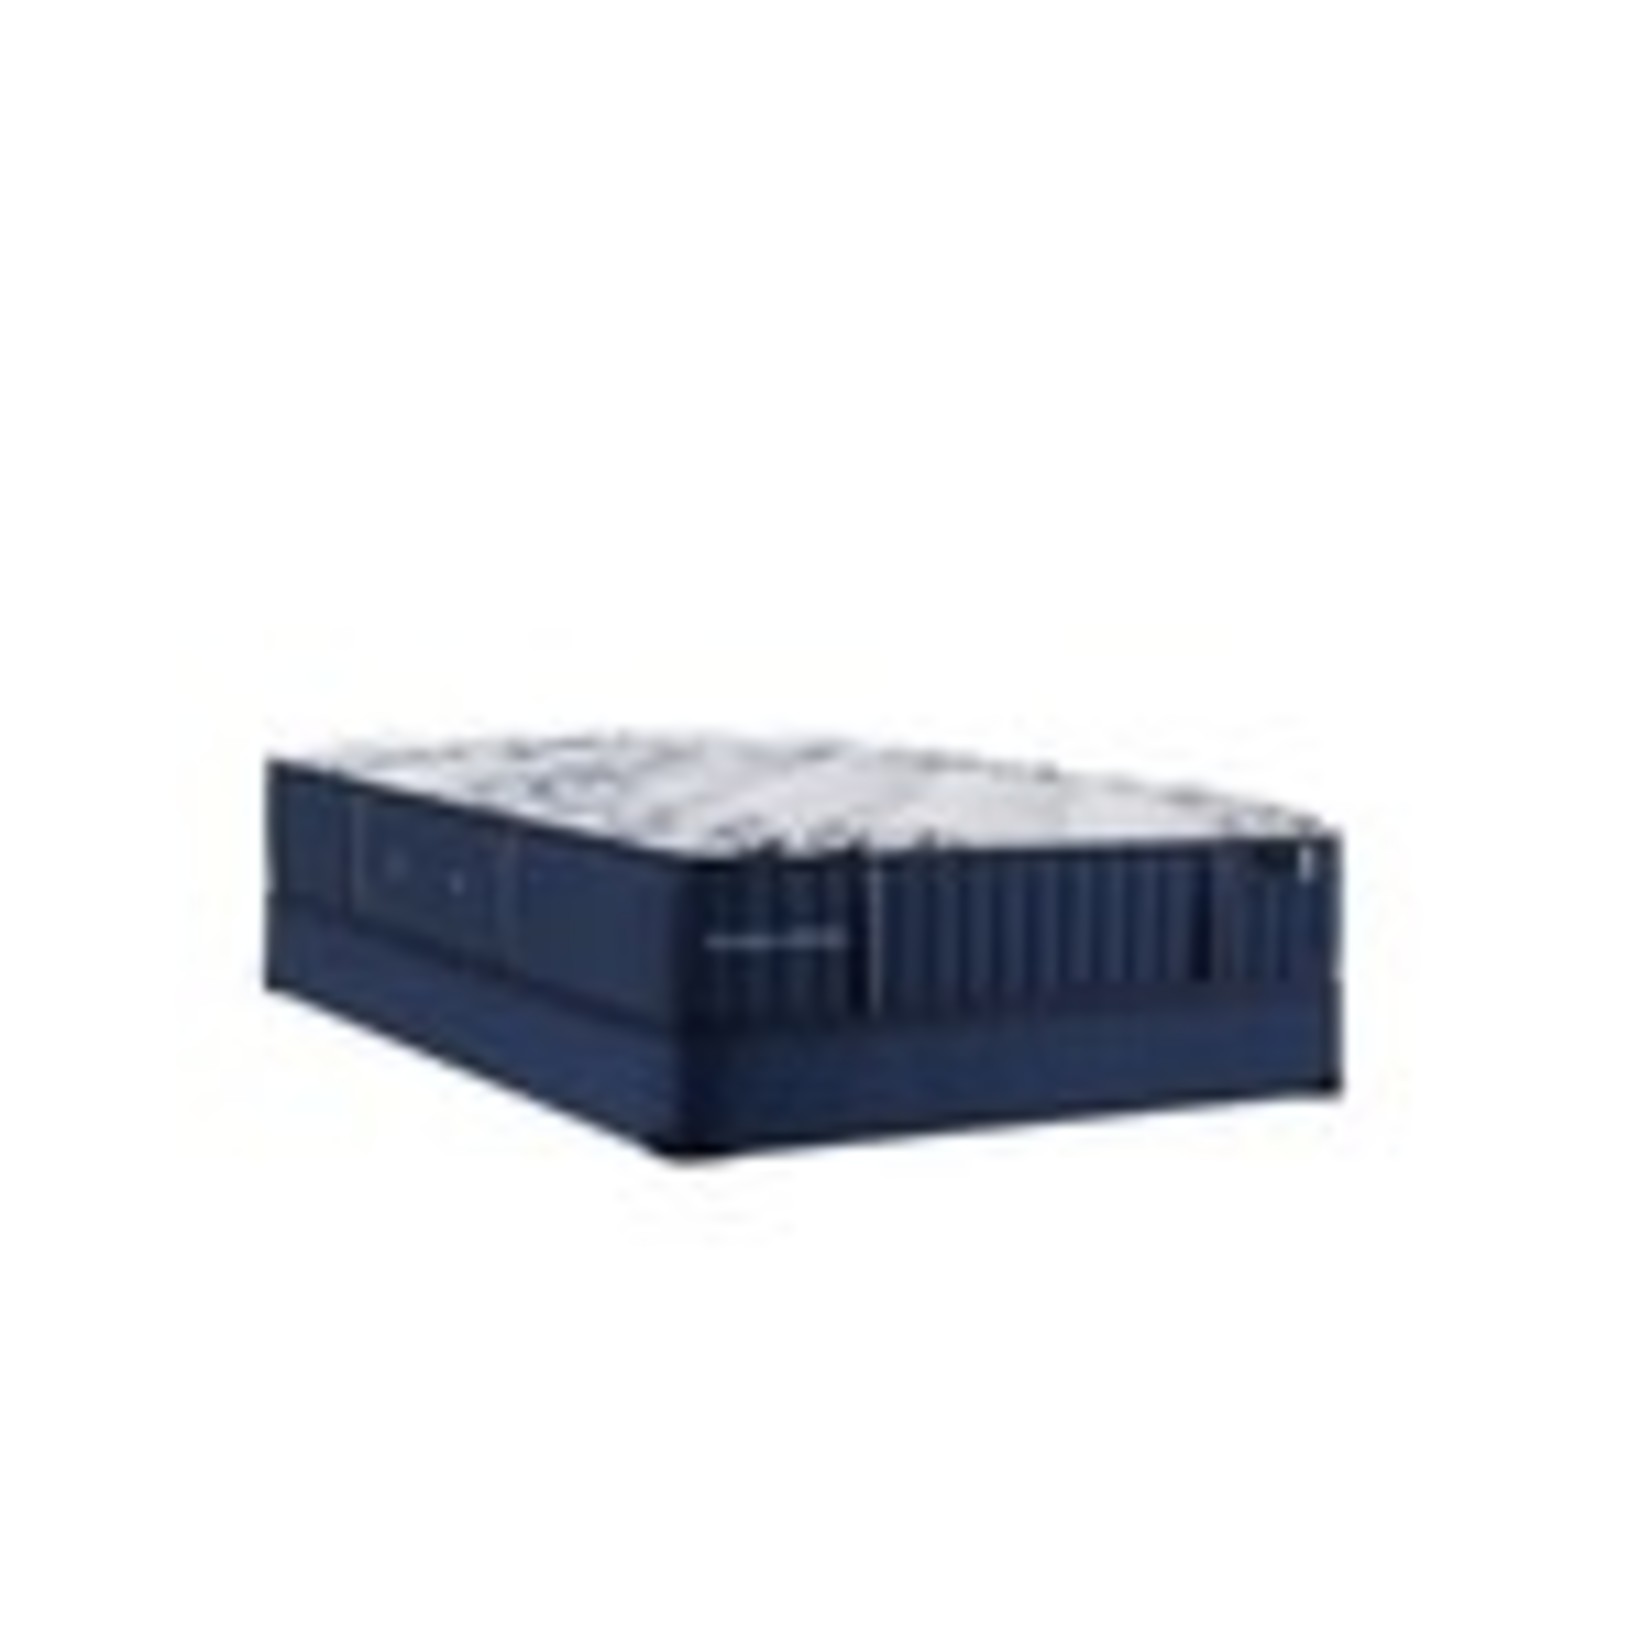 STEARNS AND FOSTER MON TRESOR TIGHT TOP  S&F  MATTRESS